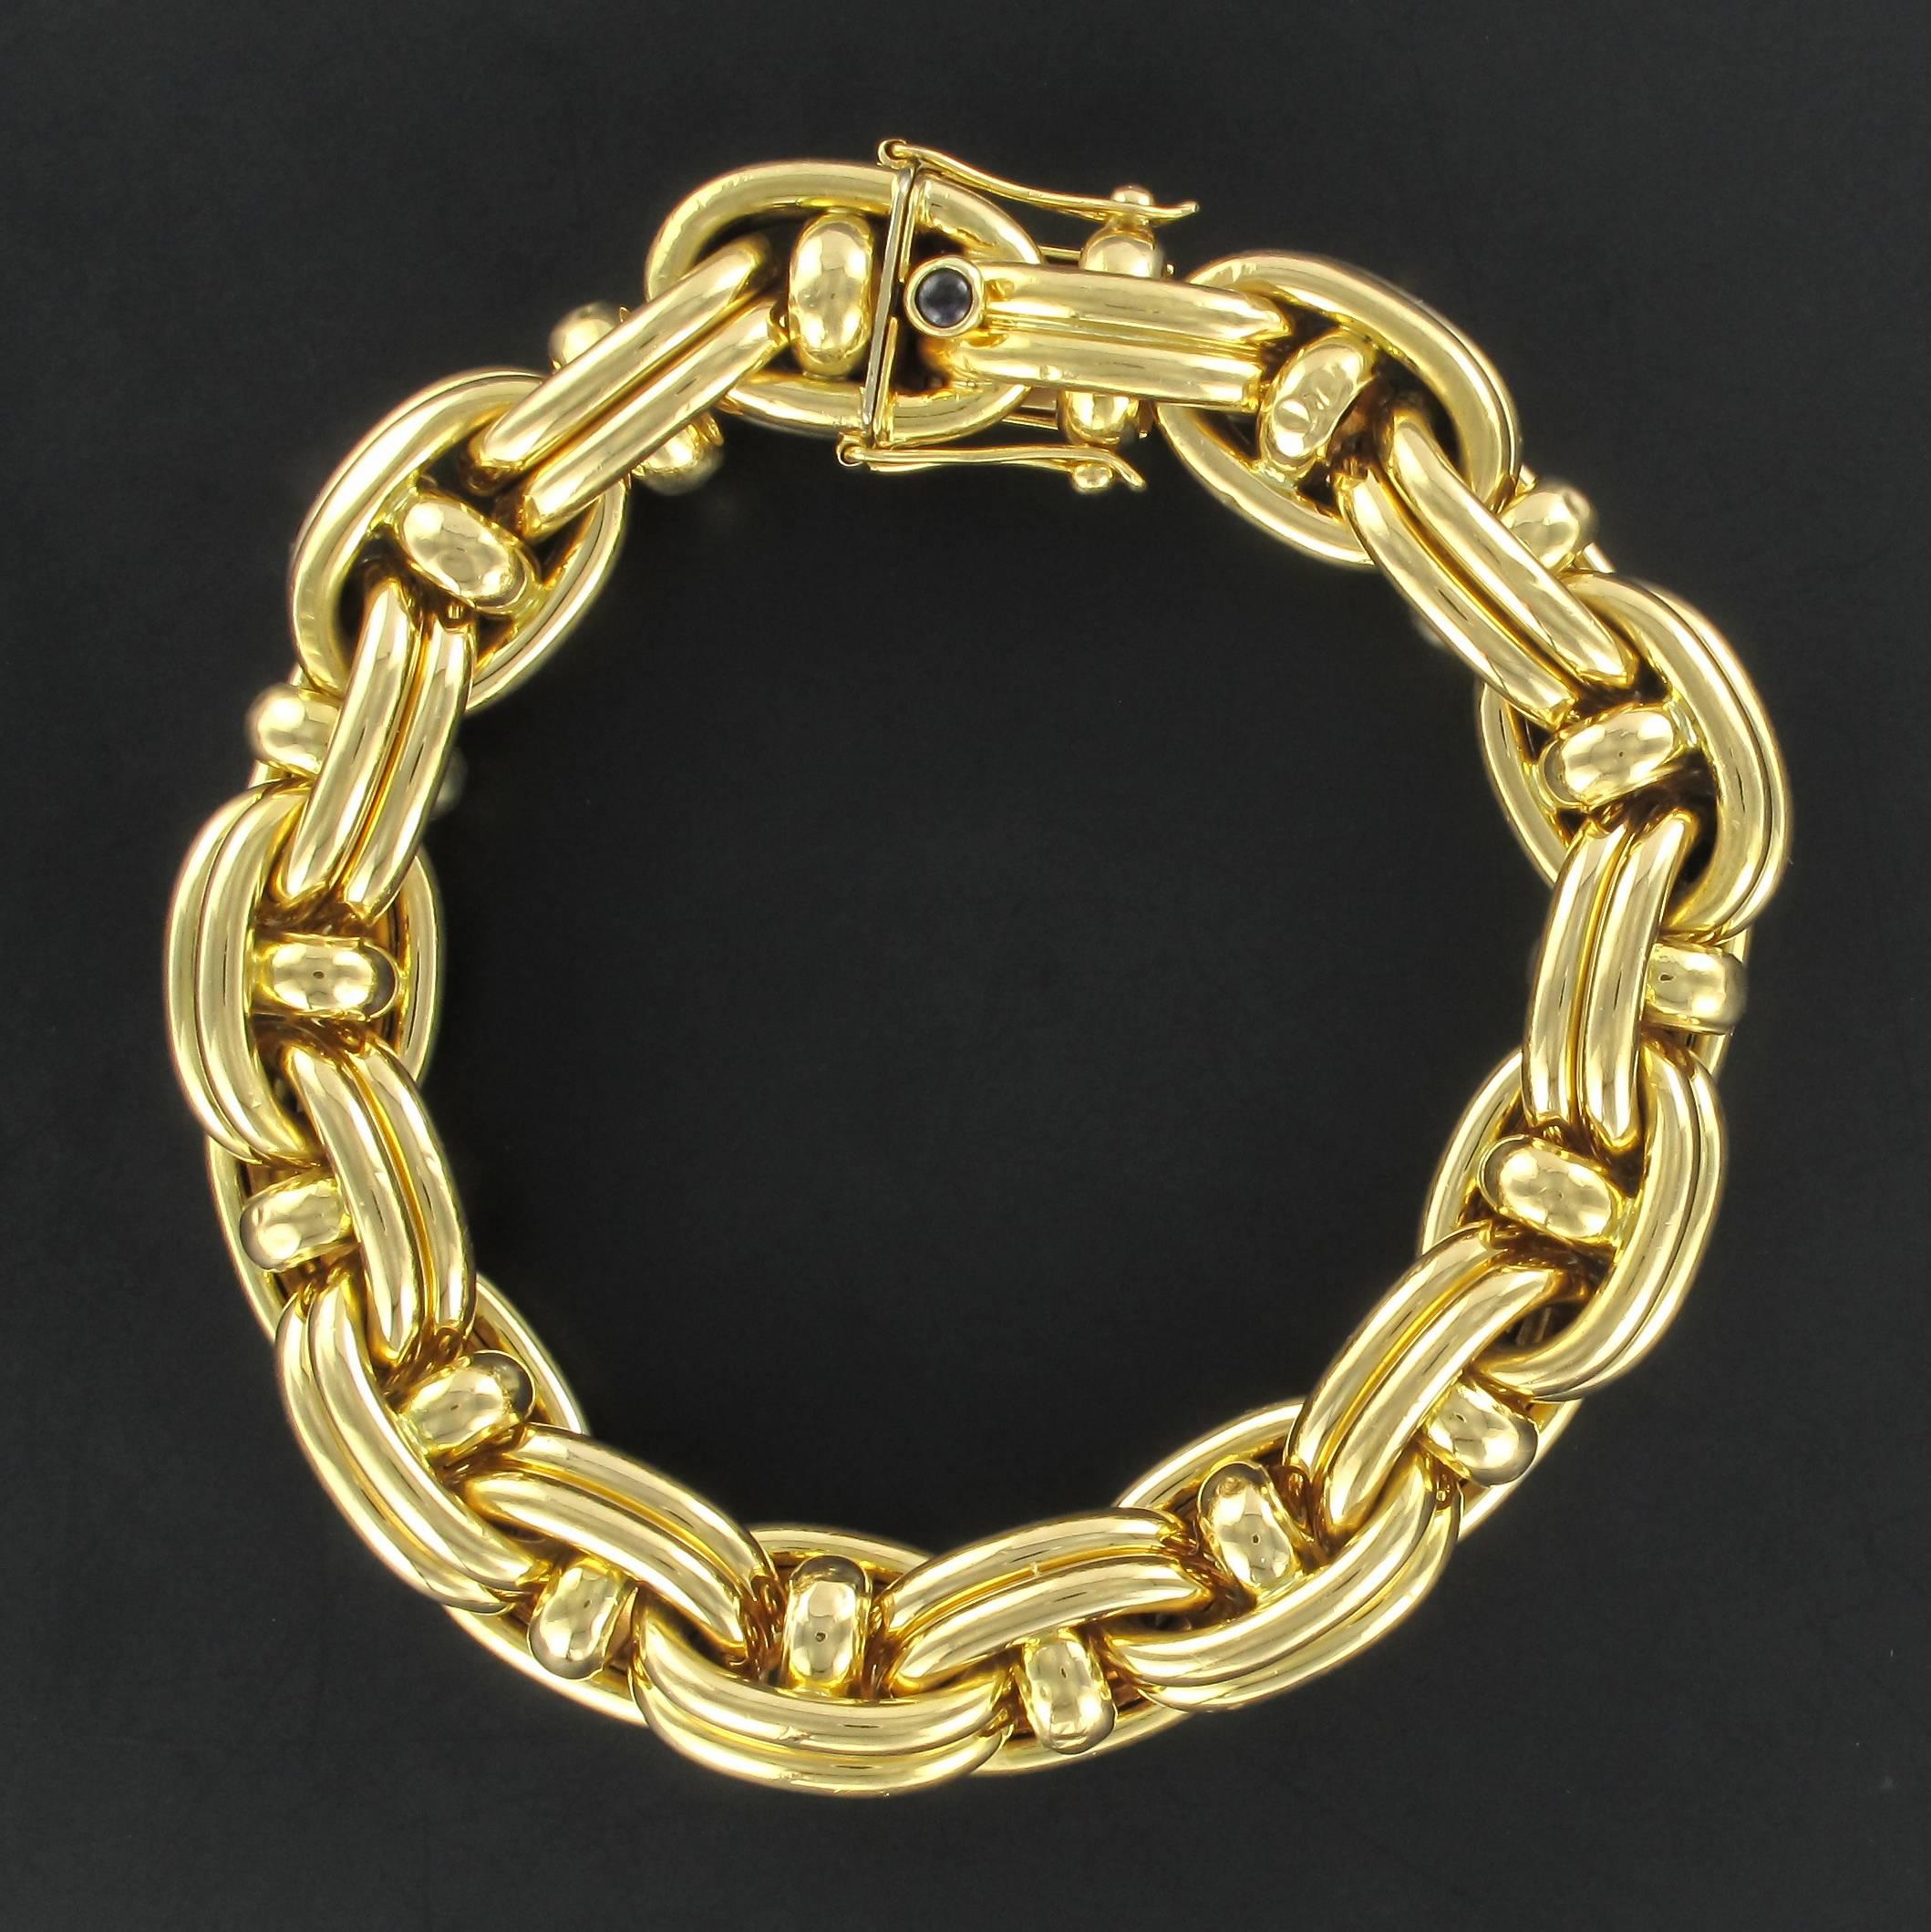 Bracelet in 18 Karat yellow gold, eagle head hallmark. 
This bracelet, signed Caplain, is composed of a double anchor link chain. The clip clasp with a safety 8 feature is hidden within the end links. The clasp is bezel set with a small round